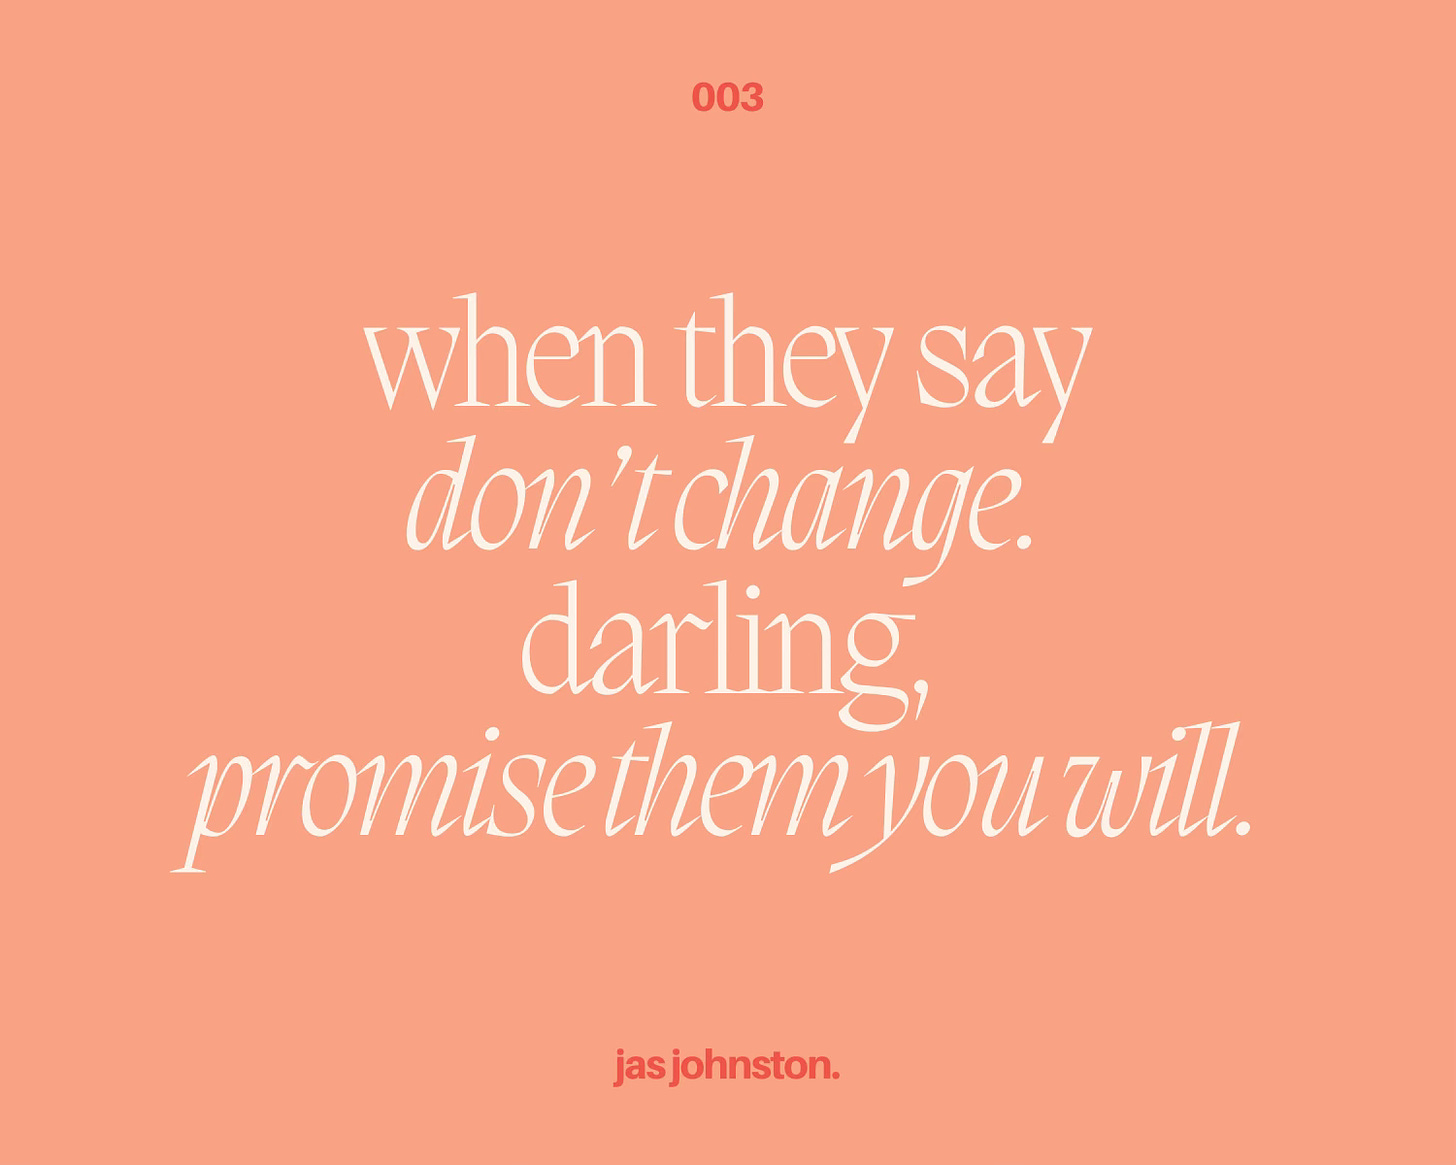 peach coloured background with white font. the font reads the same as the title of the essay: when they say don't change, darling, promise them you will.